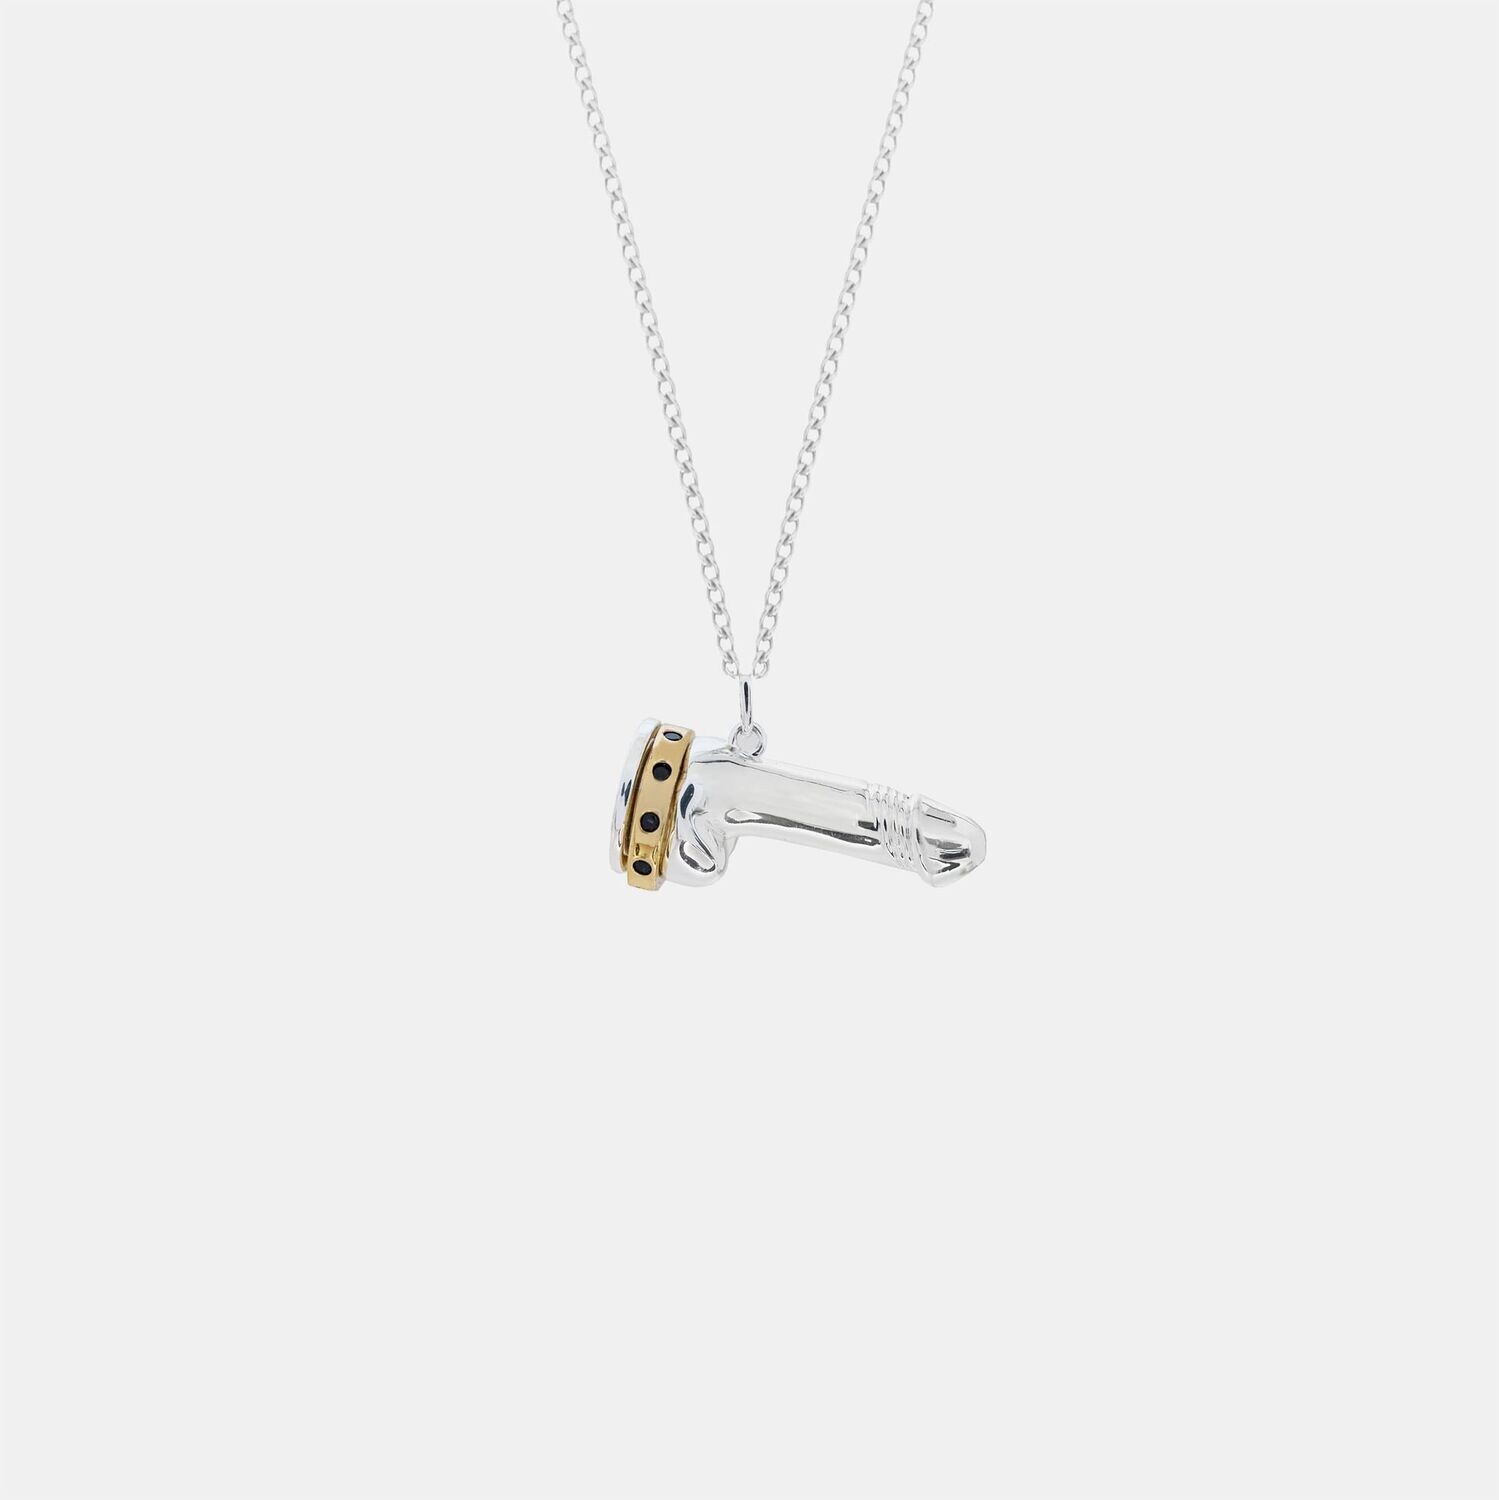 Hoemo World - Spinning Diamond Cock Ring Pendant Necklace - Silver